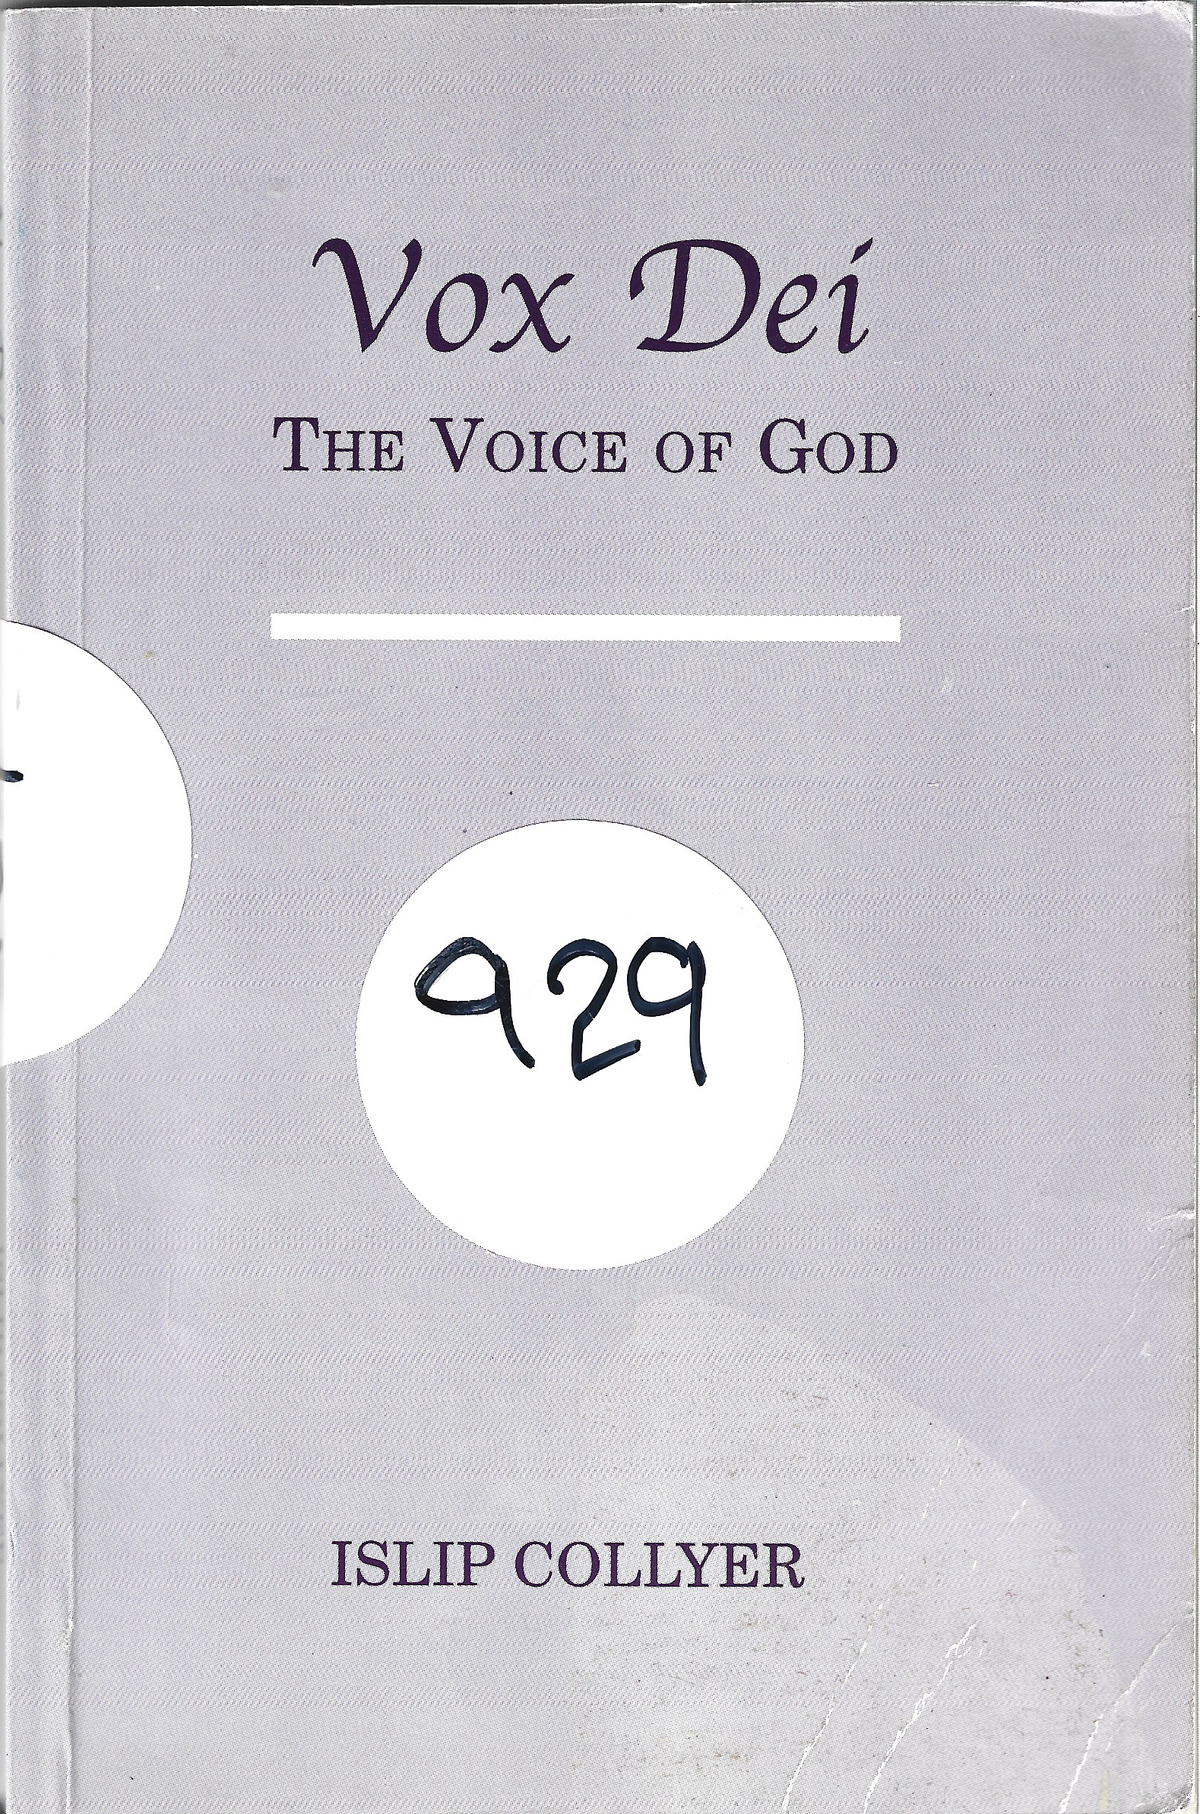 Vox Dei - The Voice of God - Used Book